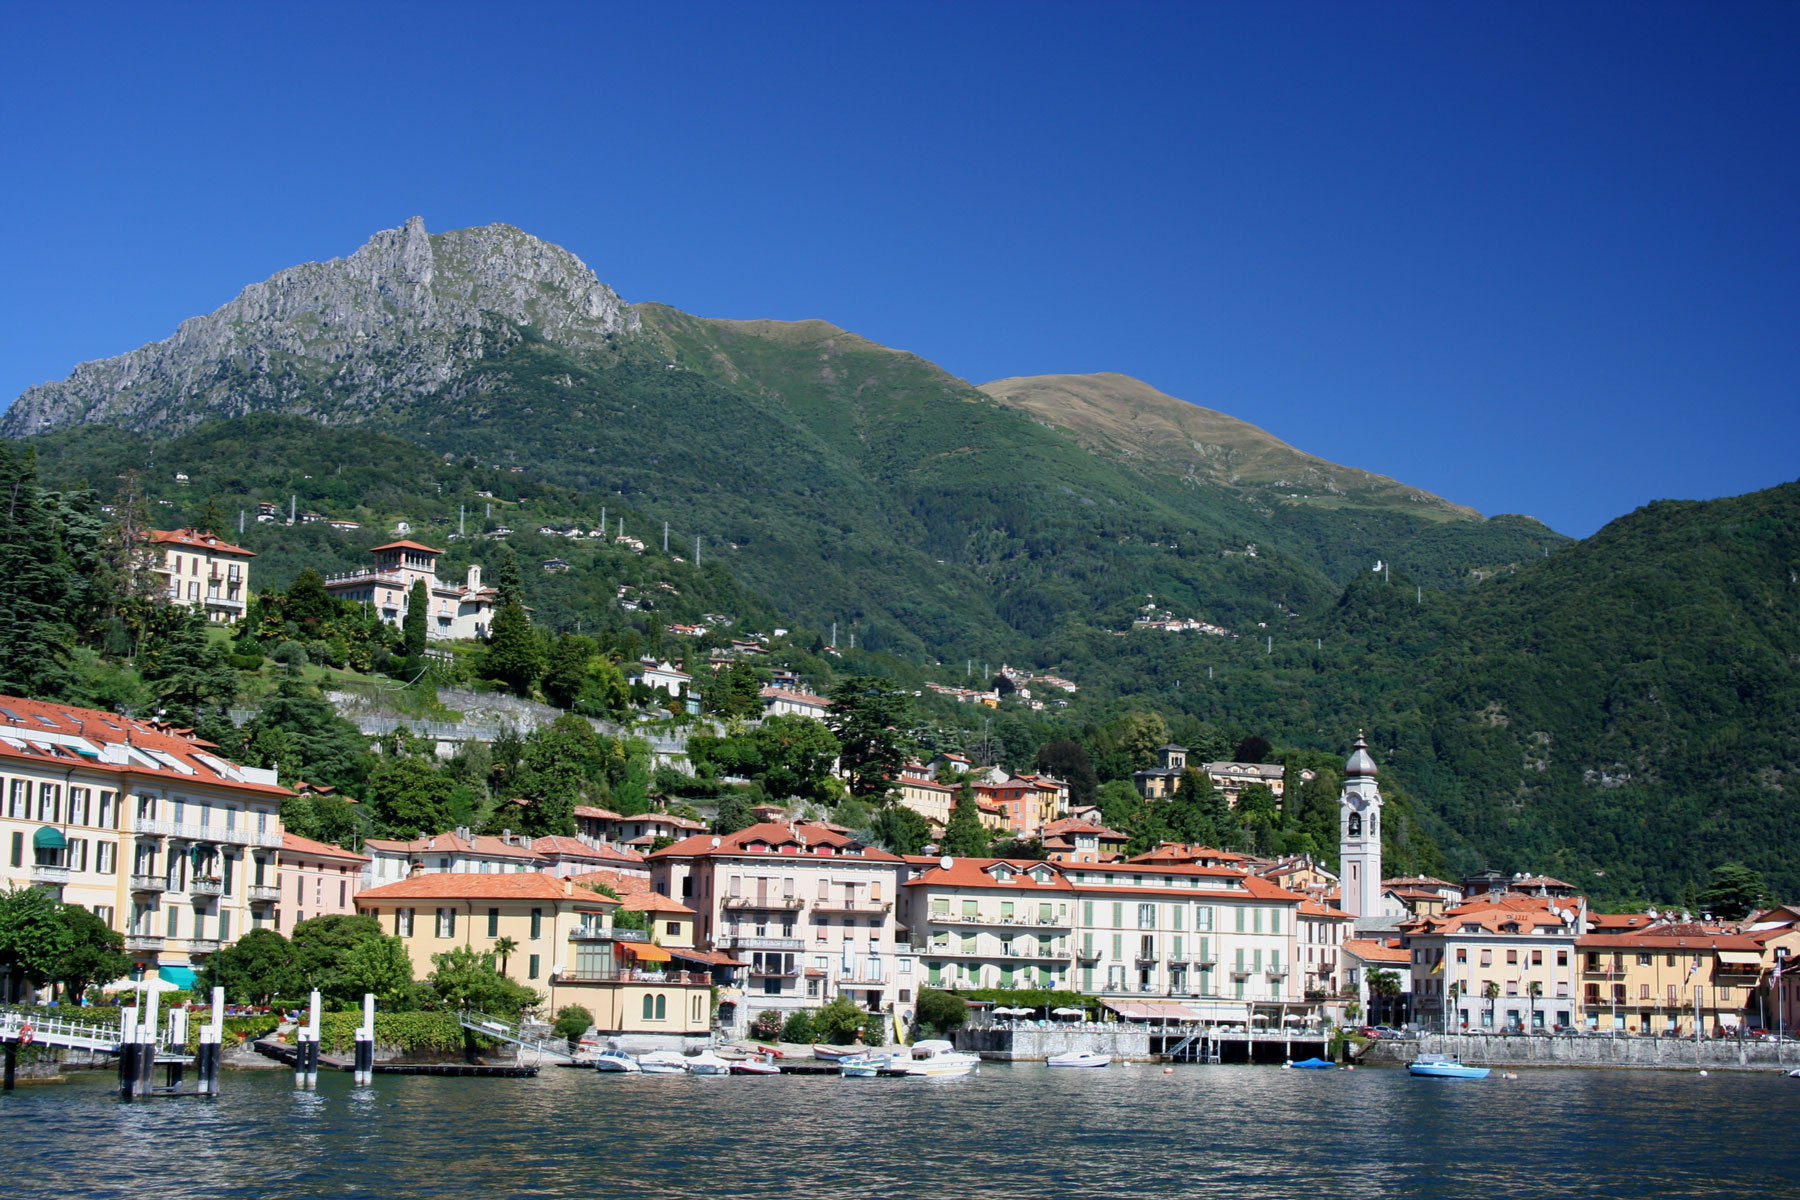 View of Menaggio from the lake